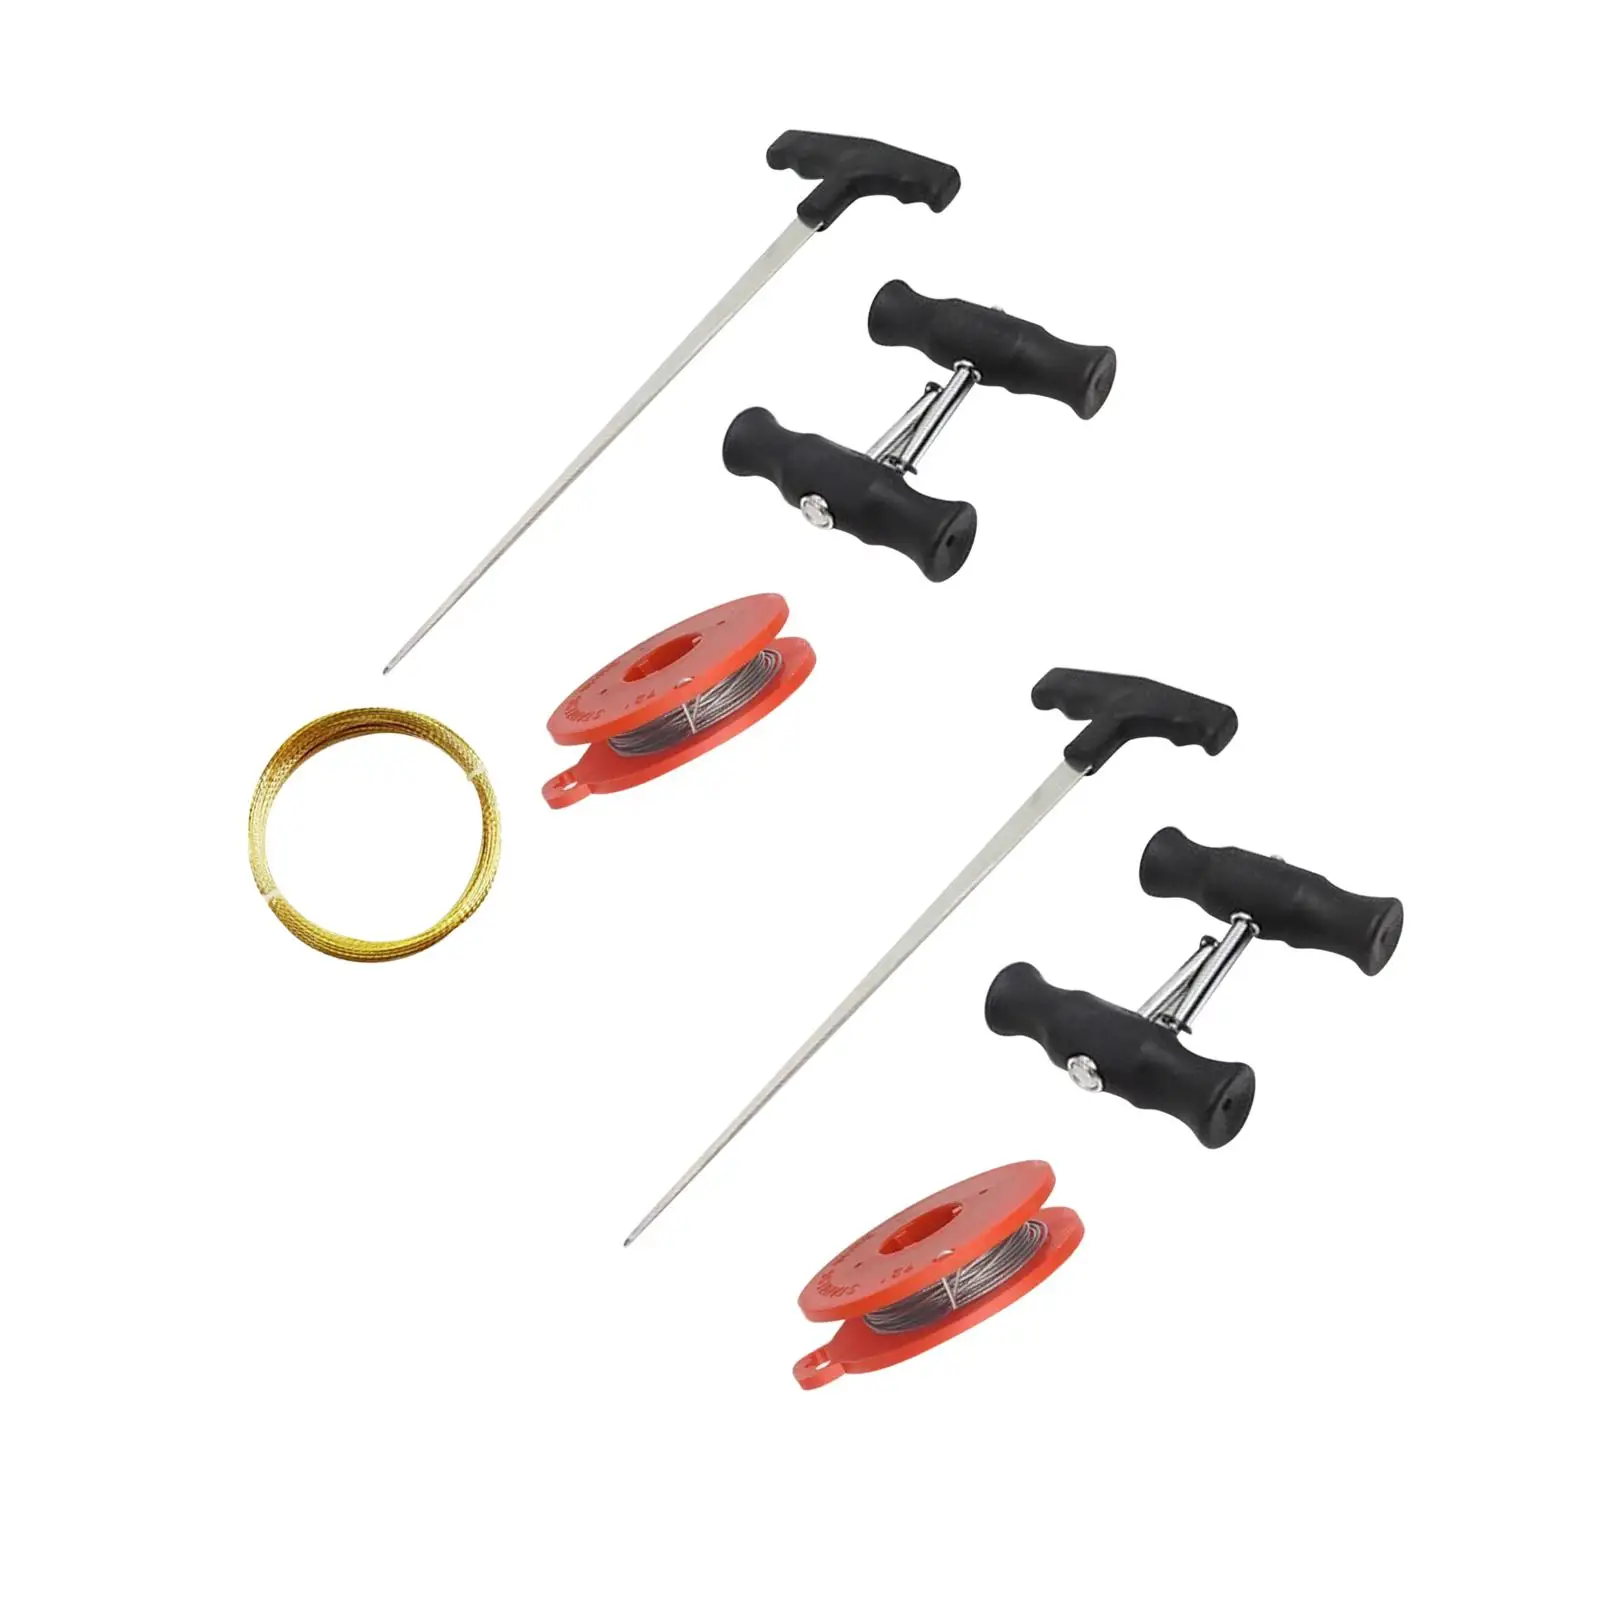 Auto Windshield Removal Tools Set Quality Compact Durable Car Glass Disassembly Non Slip with Steel Wire Wind Glass Remover